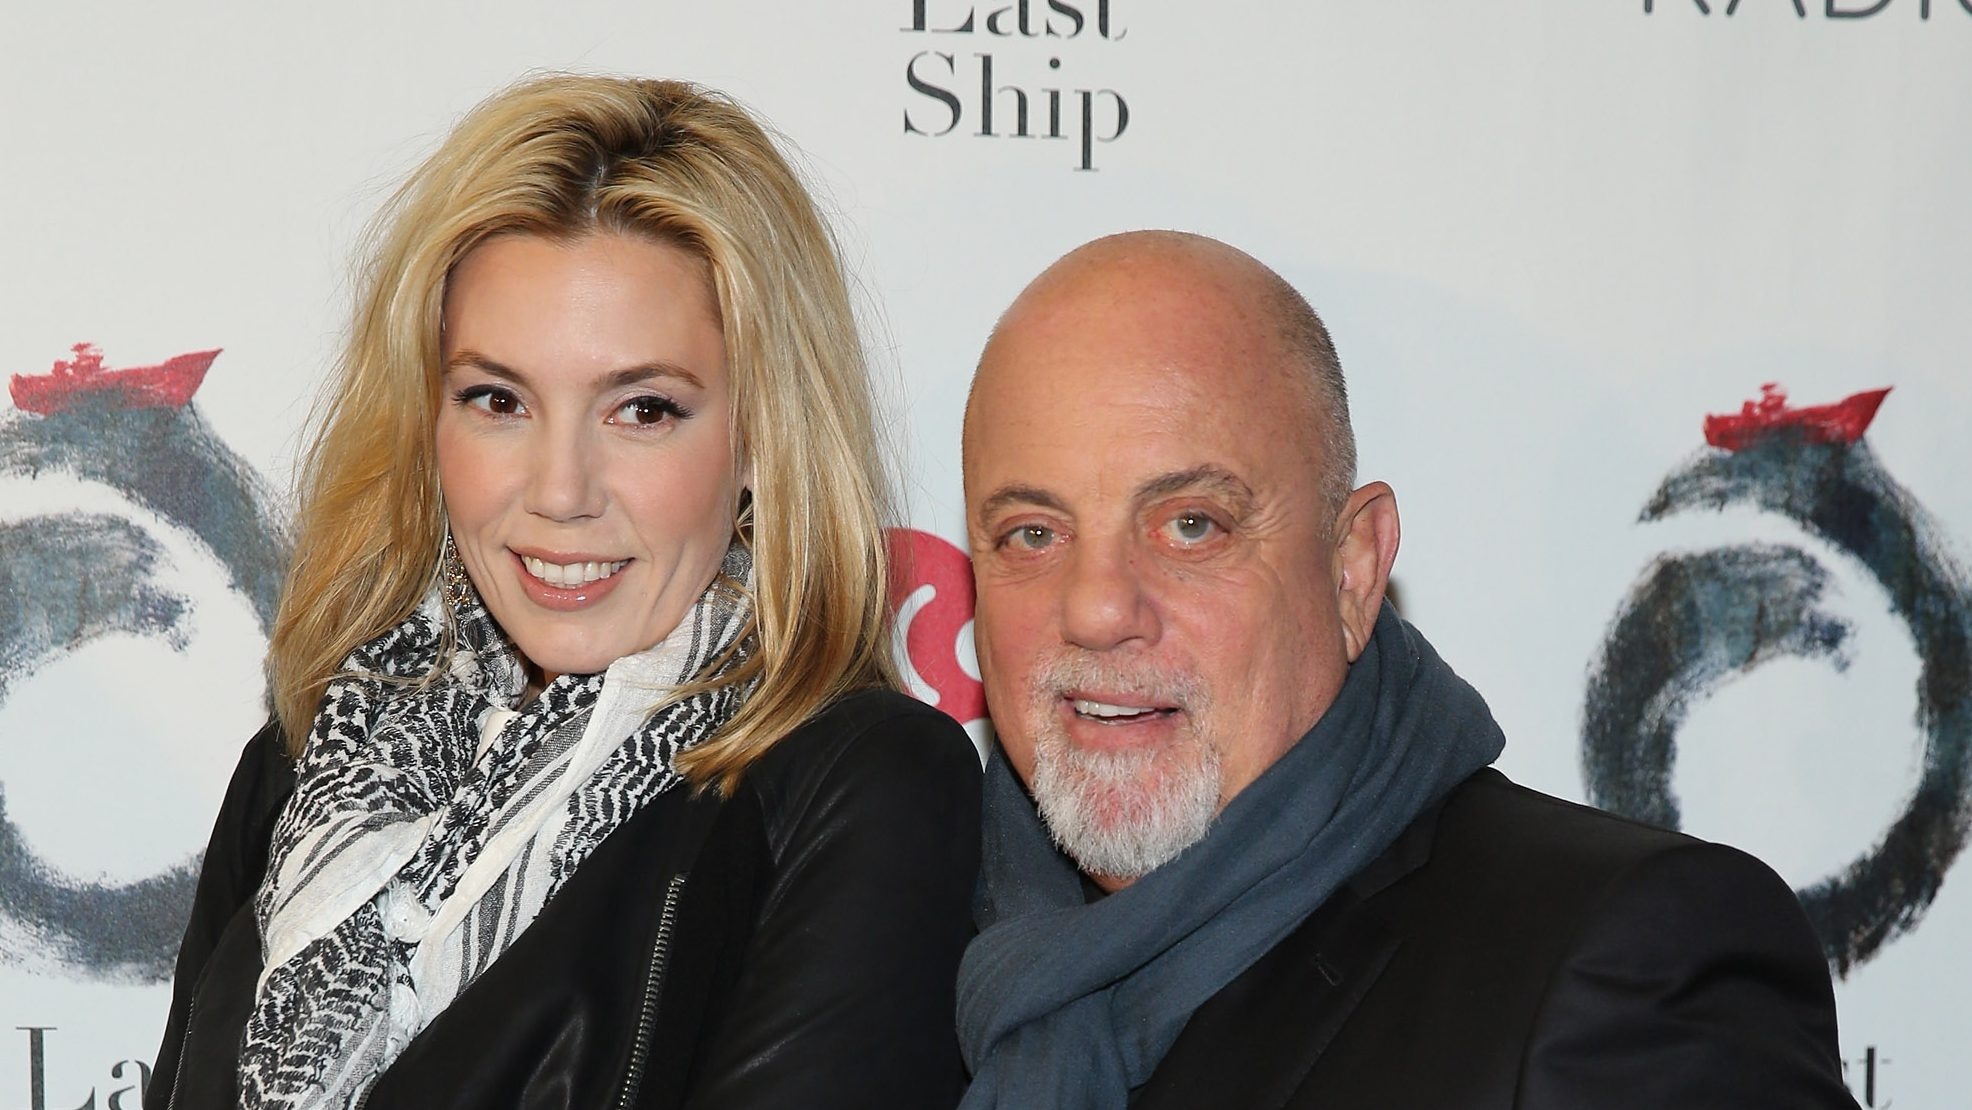 Billy Joel's wife, Alexis Roderick, Love story, Supporting the music legend, 1980x1110 HD Desktop